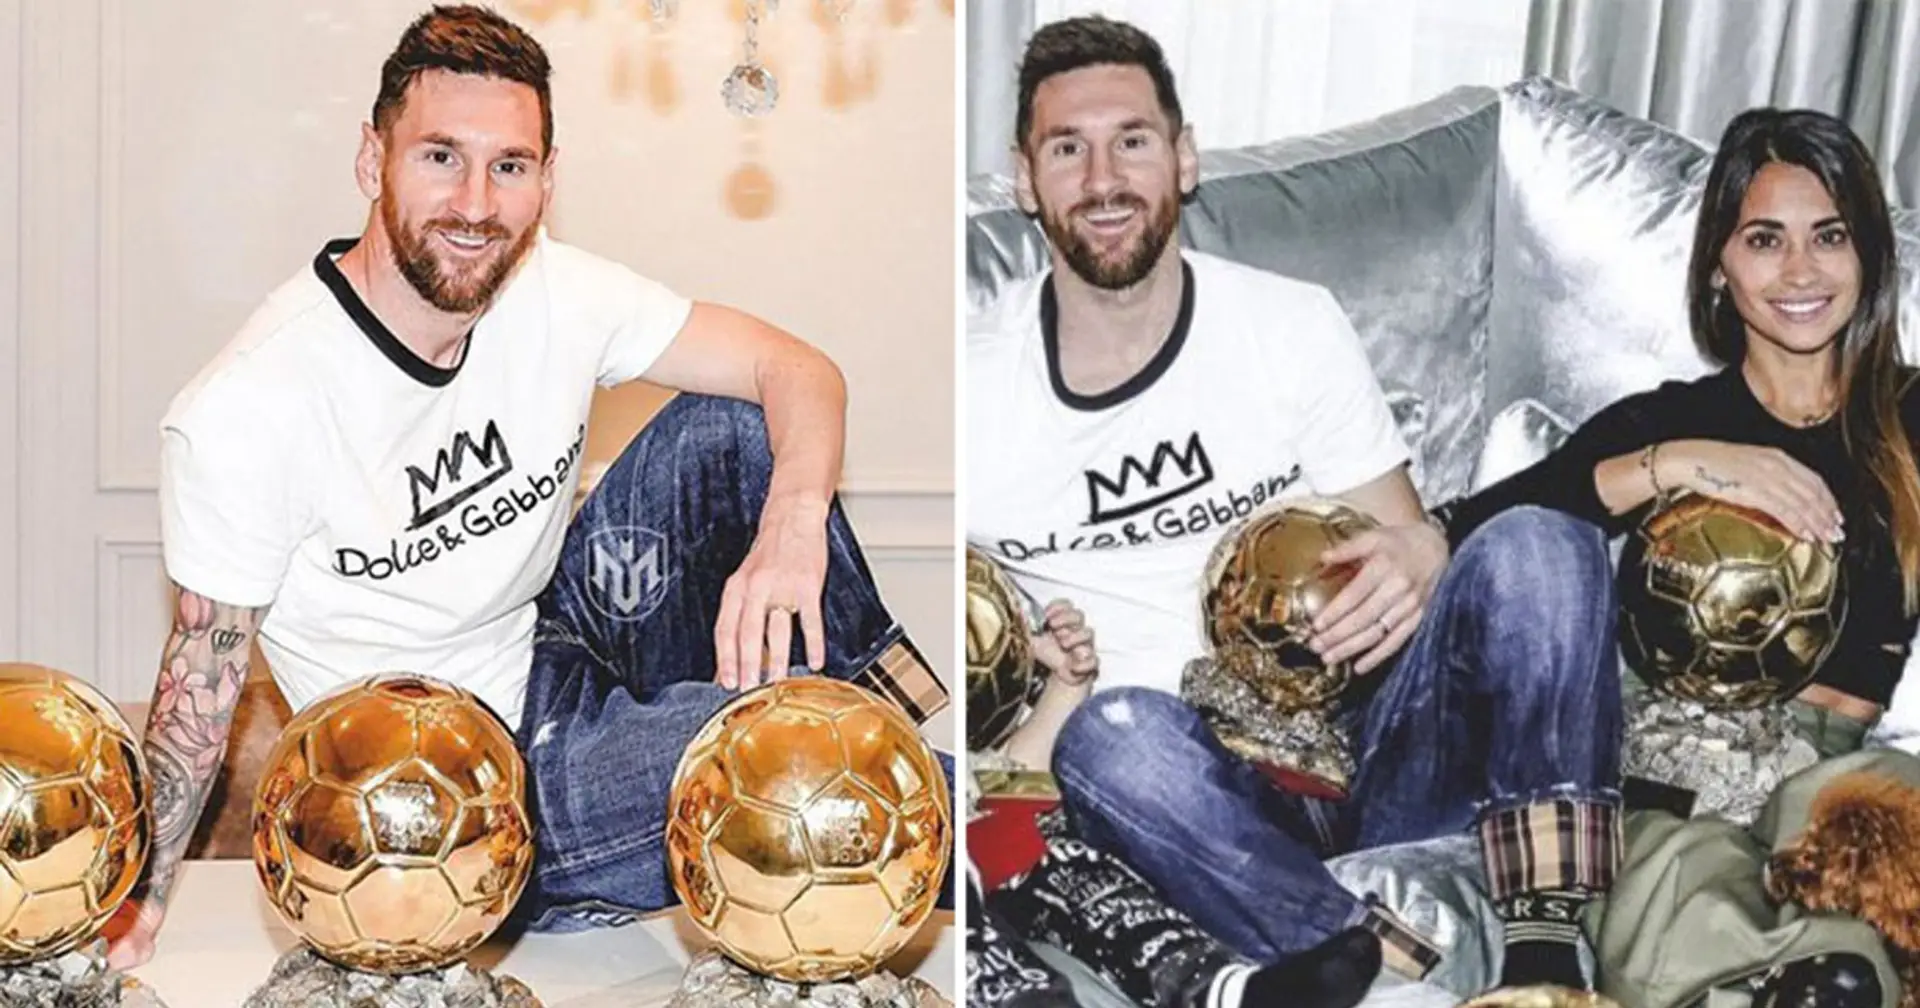 You wanted this: Messi poses with his 7 Ballon d'Ors for the first time